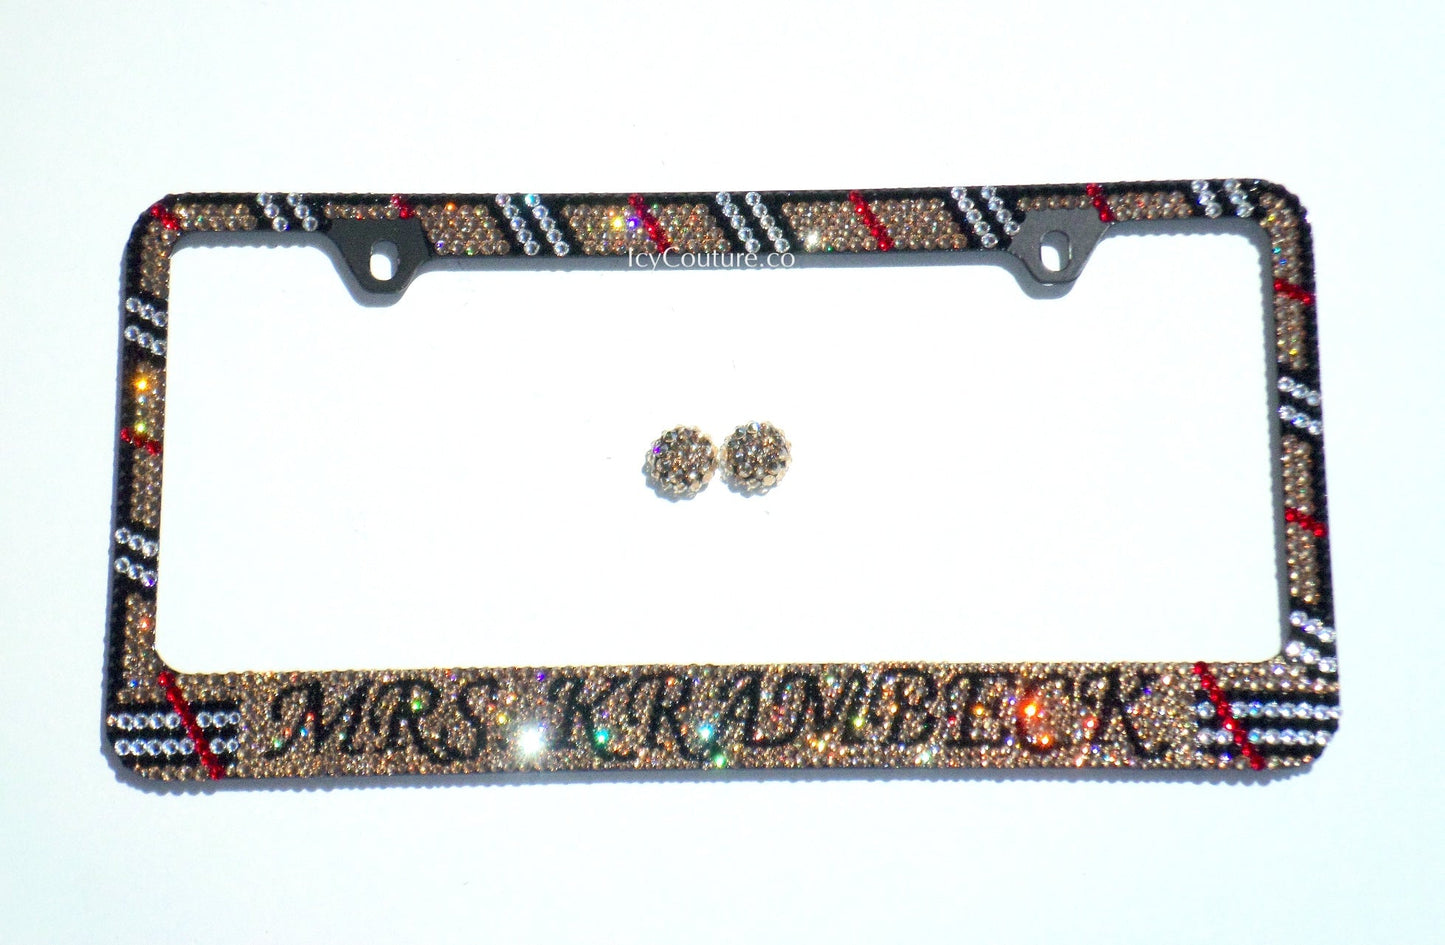 Swarovski License Plate Frame, Crystallized Crystal Bling Plate Frames by ICY Couture. | Golden Plaid with Custom Name 